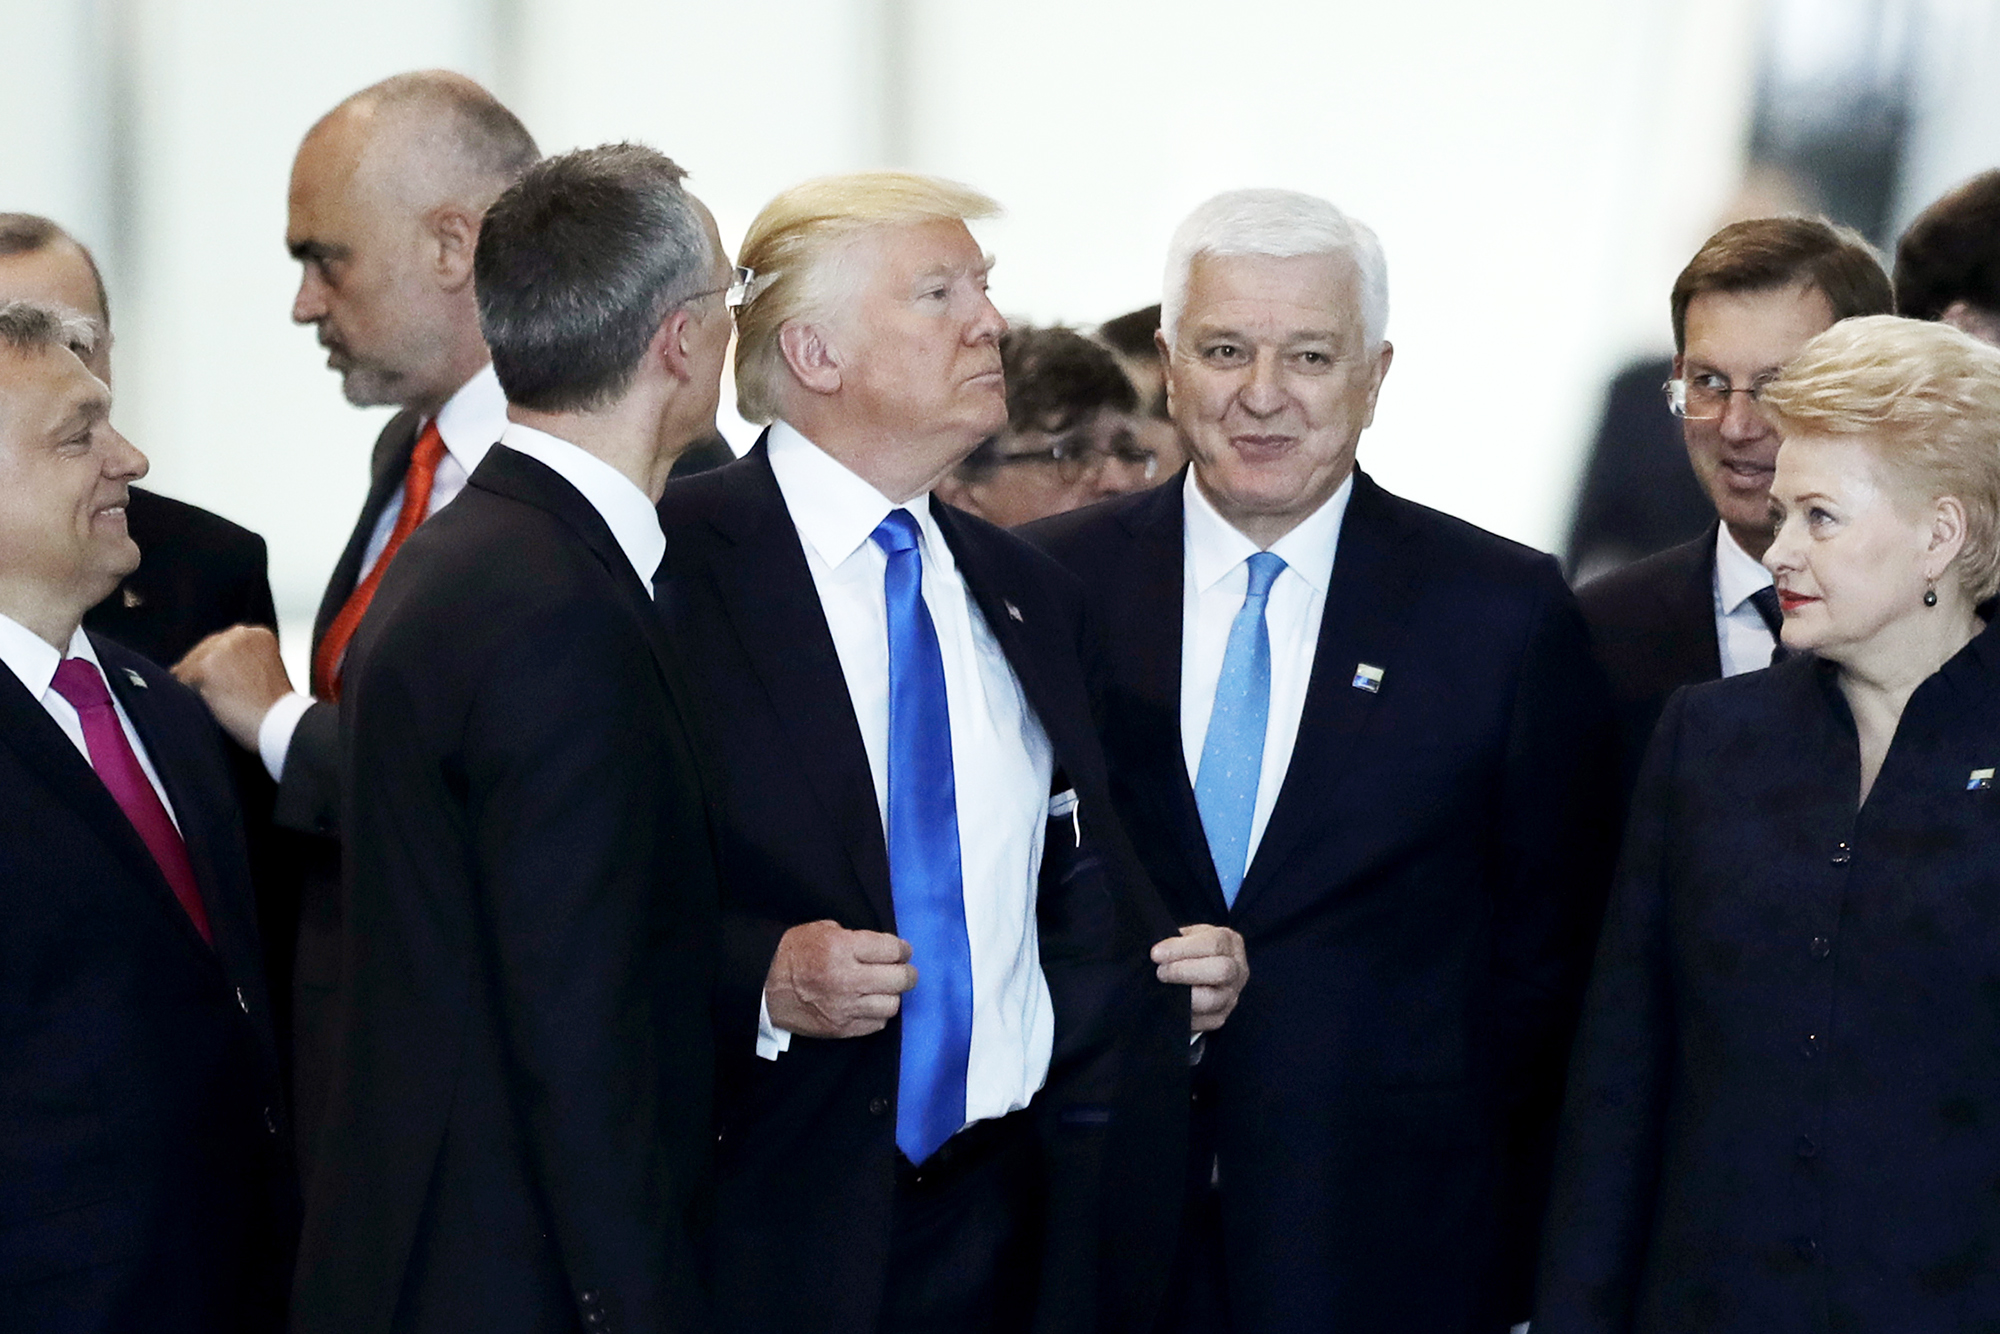 Montenegro Prime Minister Dusko Markovic, center right, after appearing to be pushed by Donald Trump, center, during a NATO summit of heads of state and government in Brussels, on May 25, 2017. (Matt Dunham—AP)